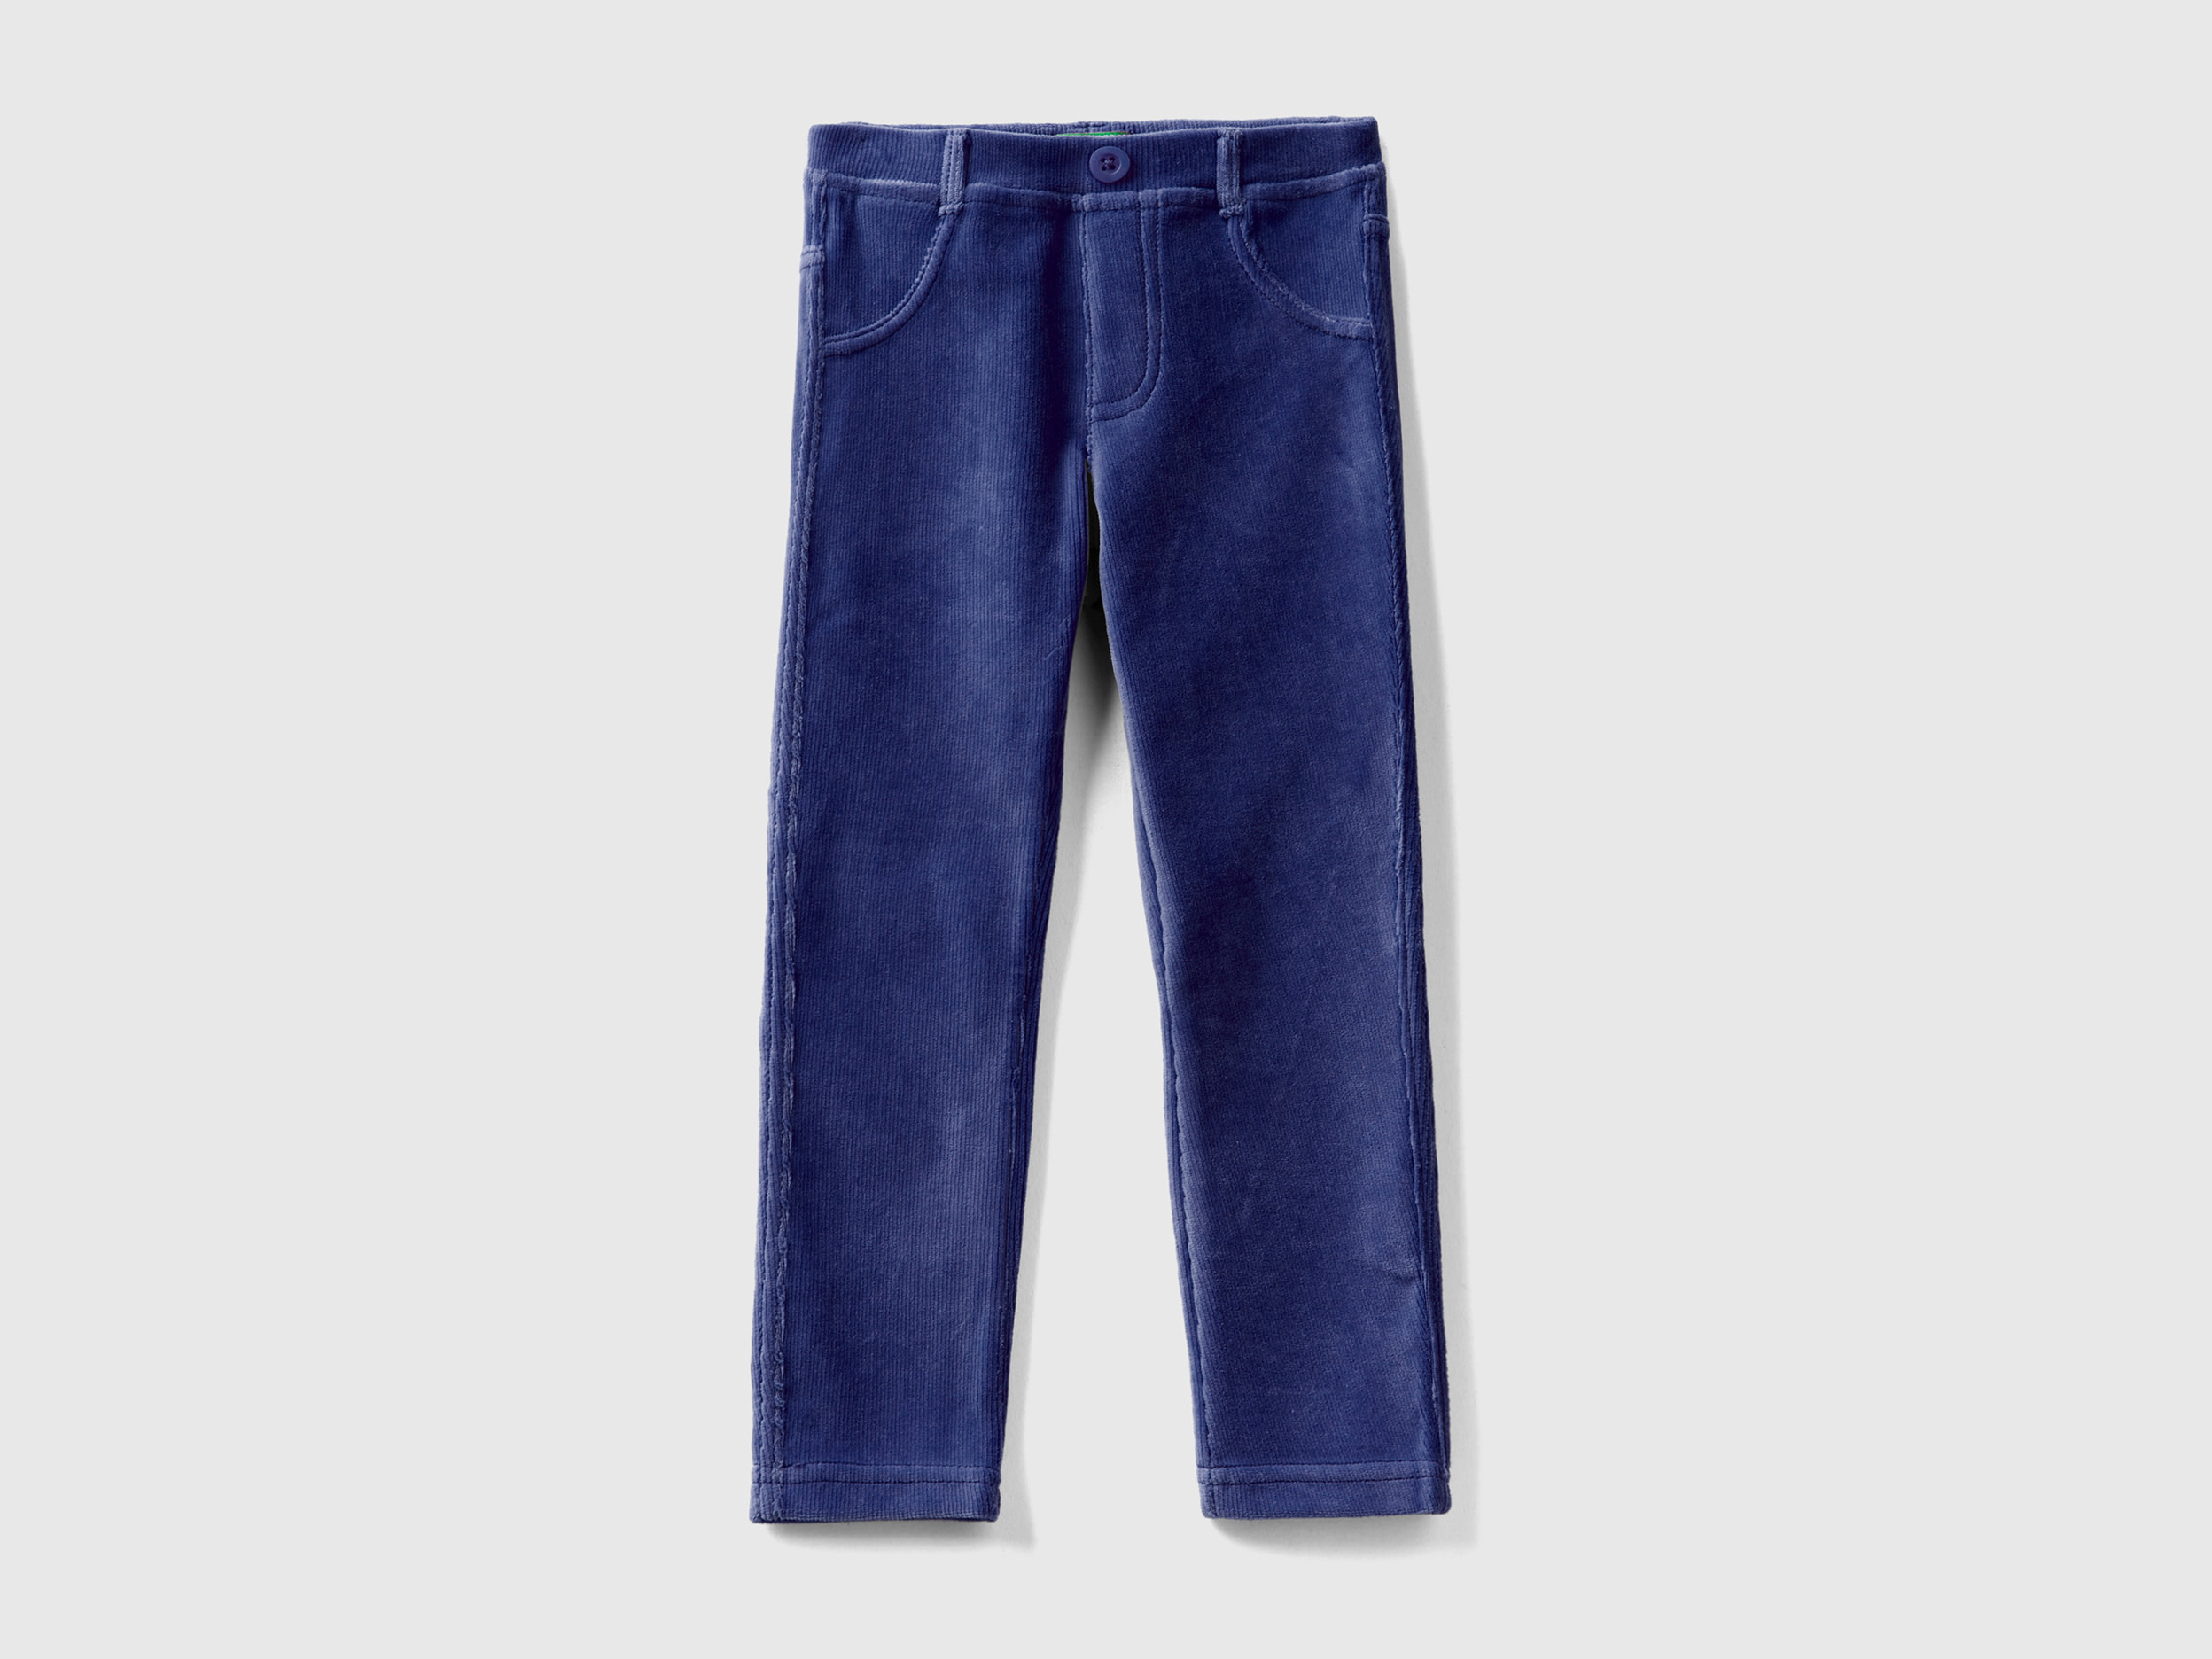 Benetton, Ribbed Chenille Trousers, size 5-6, Dark Blue, Kids